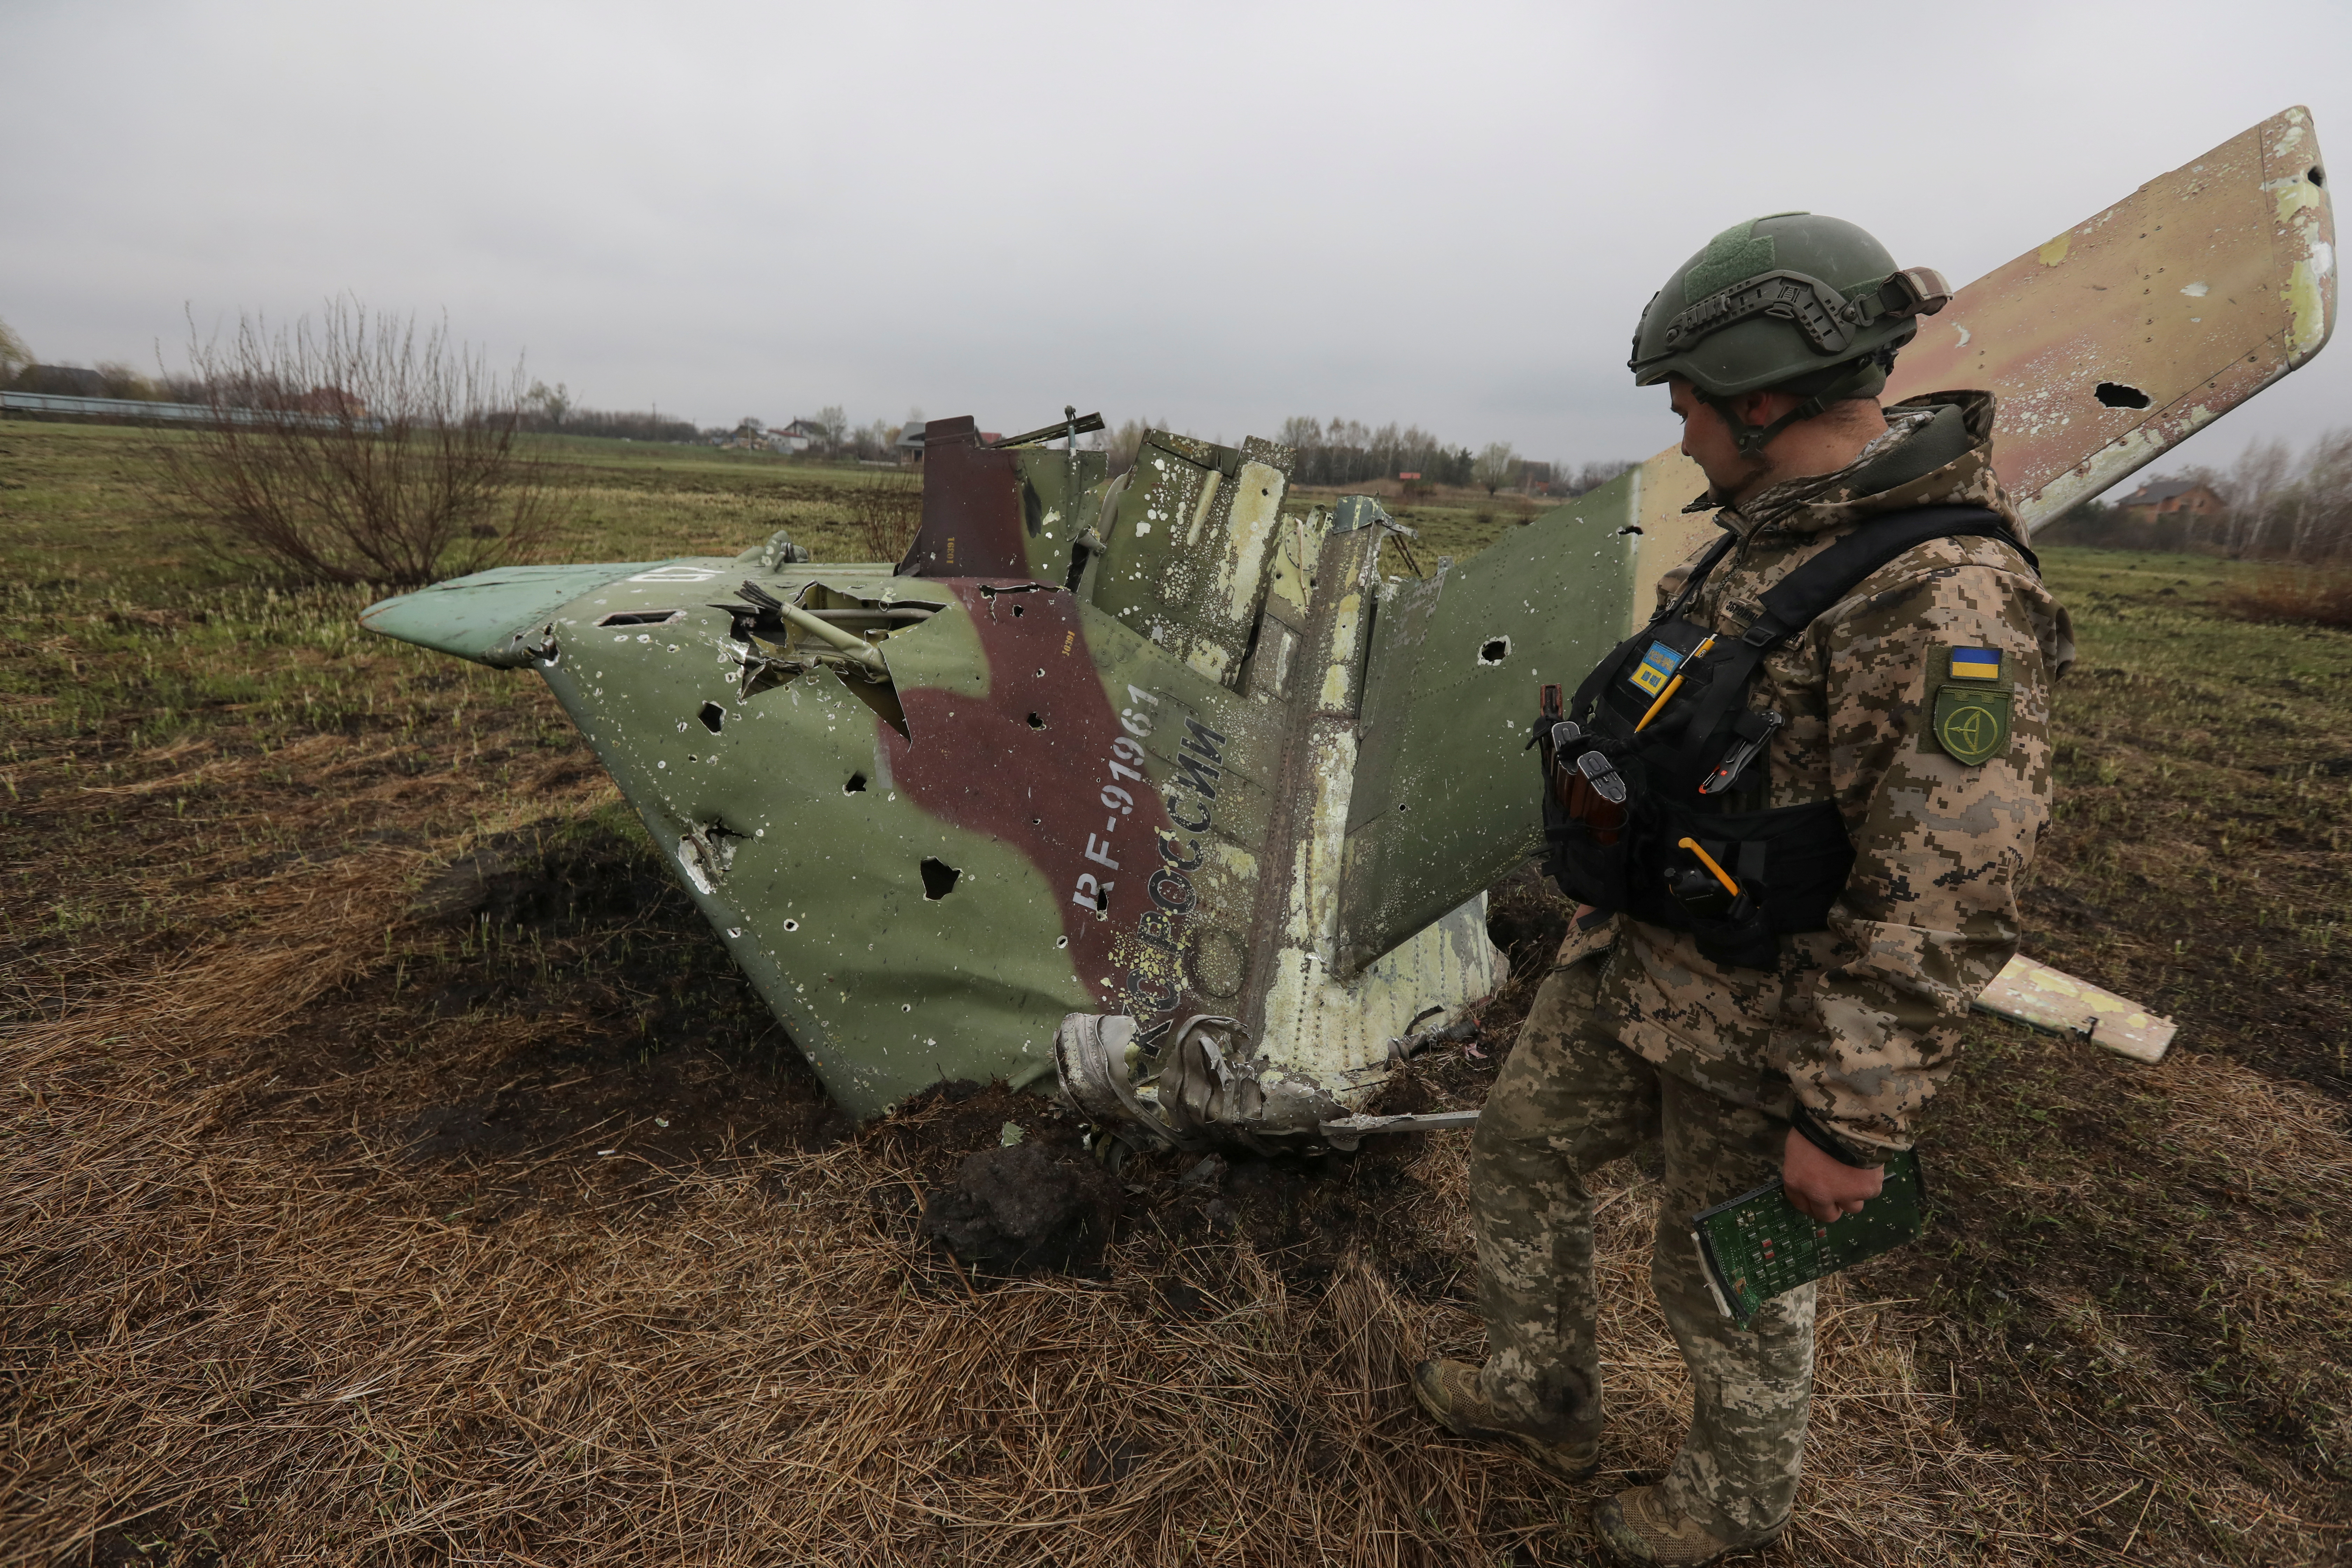 A military sapper inspects remains of a Russian Sukhoi Su-25 fighting aircraft hit by Ukrainian Armed Forces during Russia's invasion in Kyiv Region